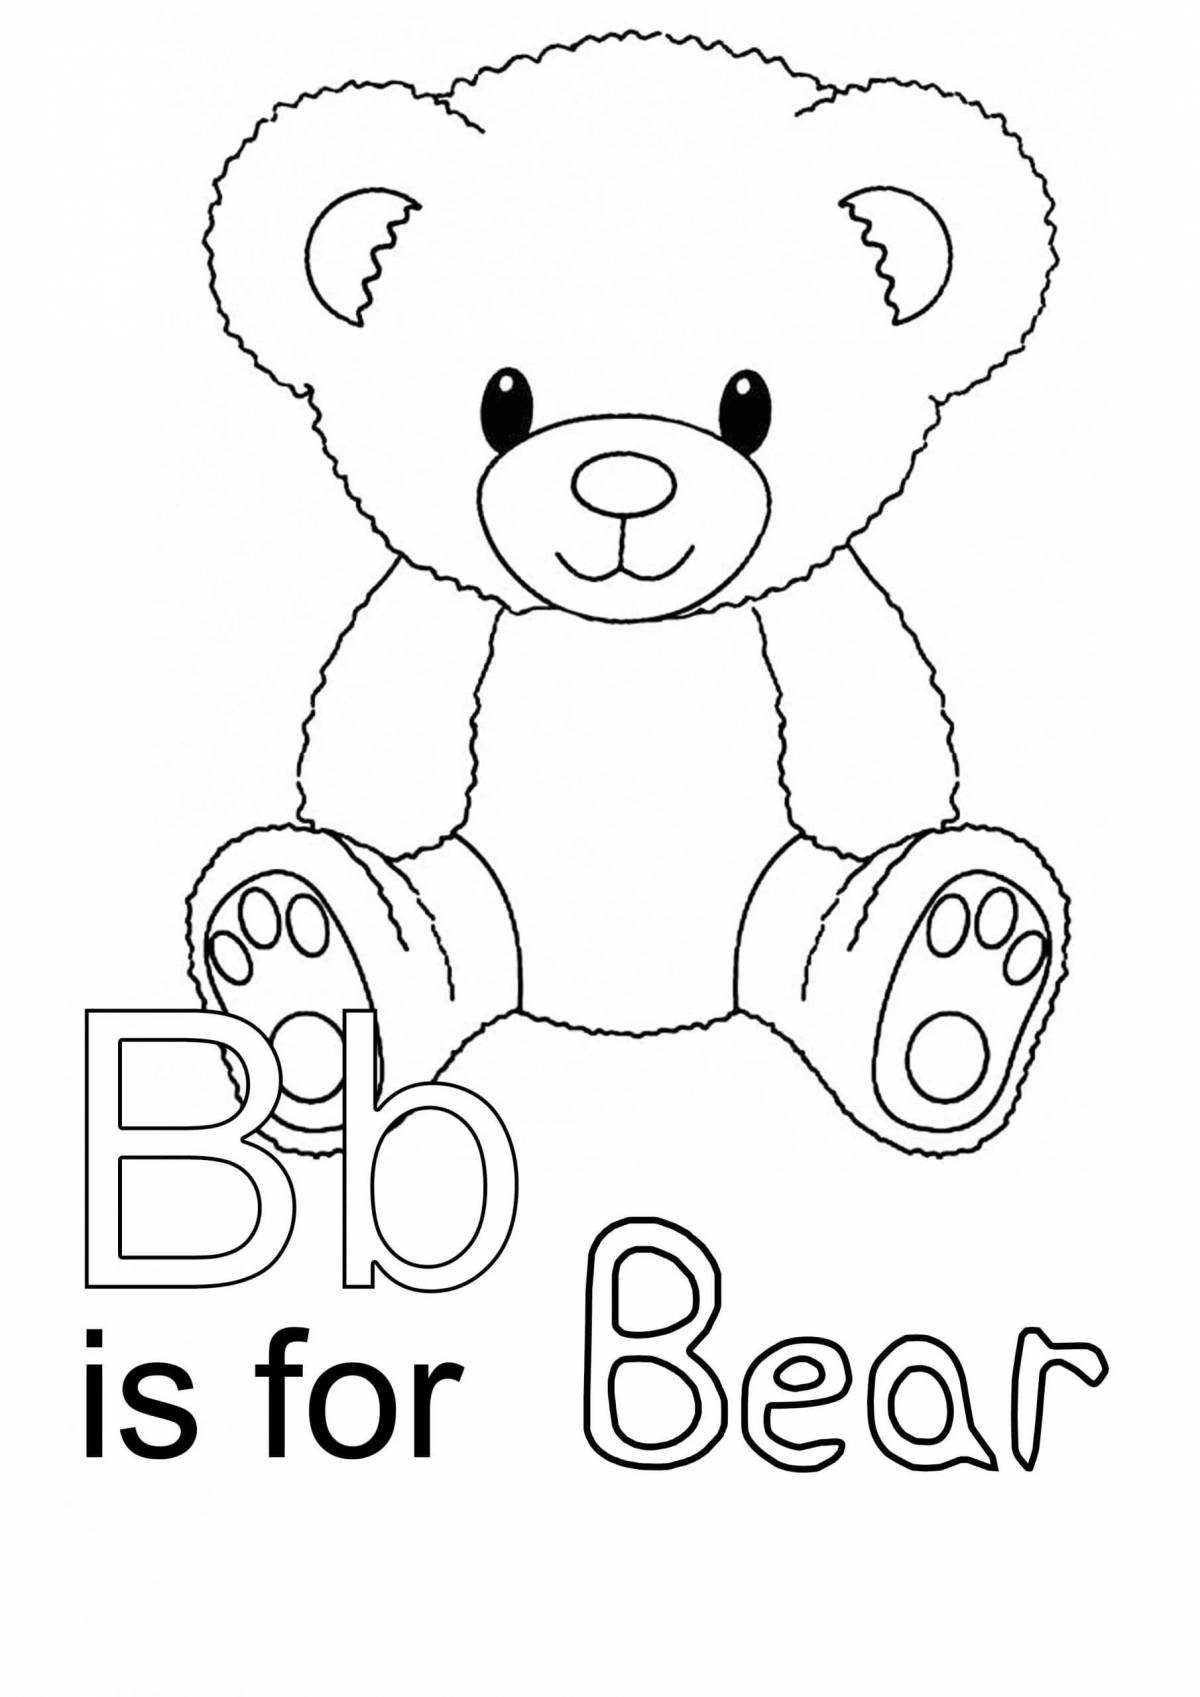 Coloring book cheerful teddy bear in children's pants